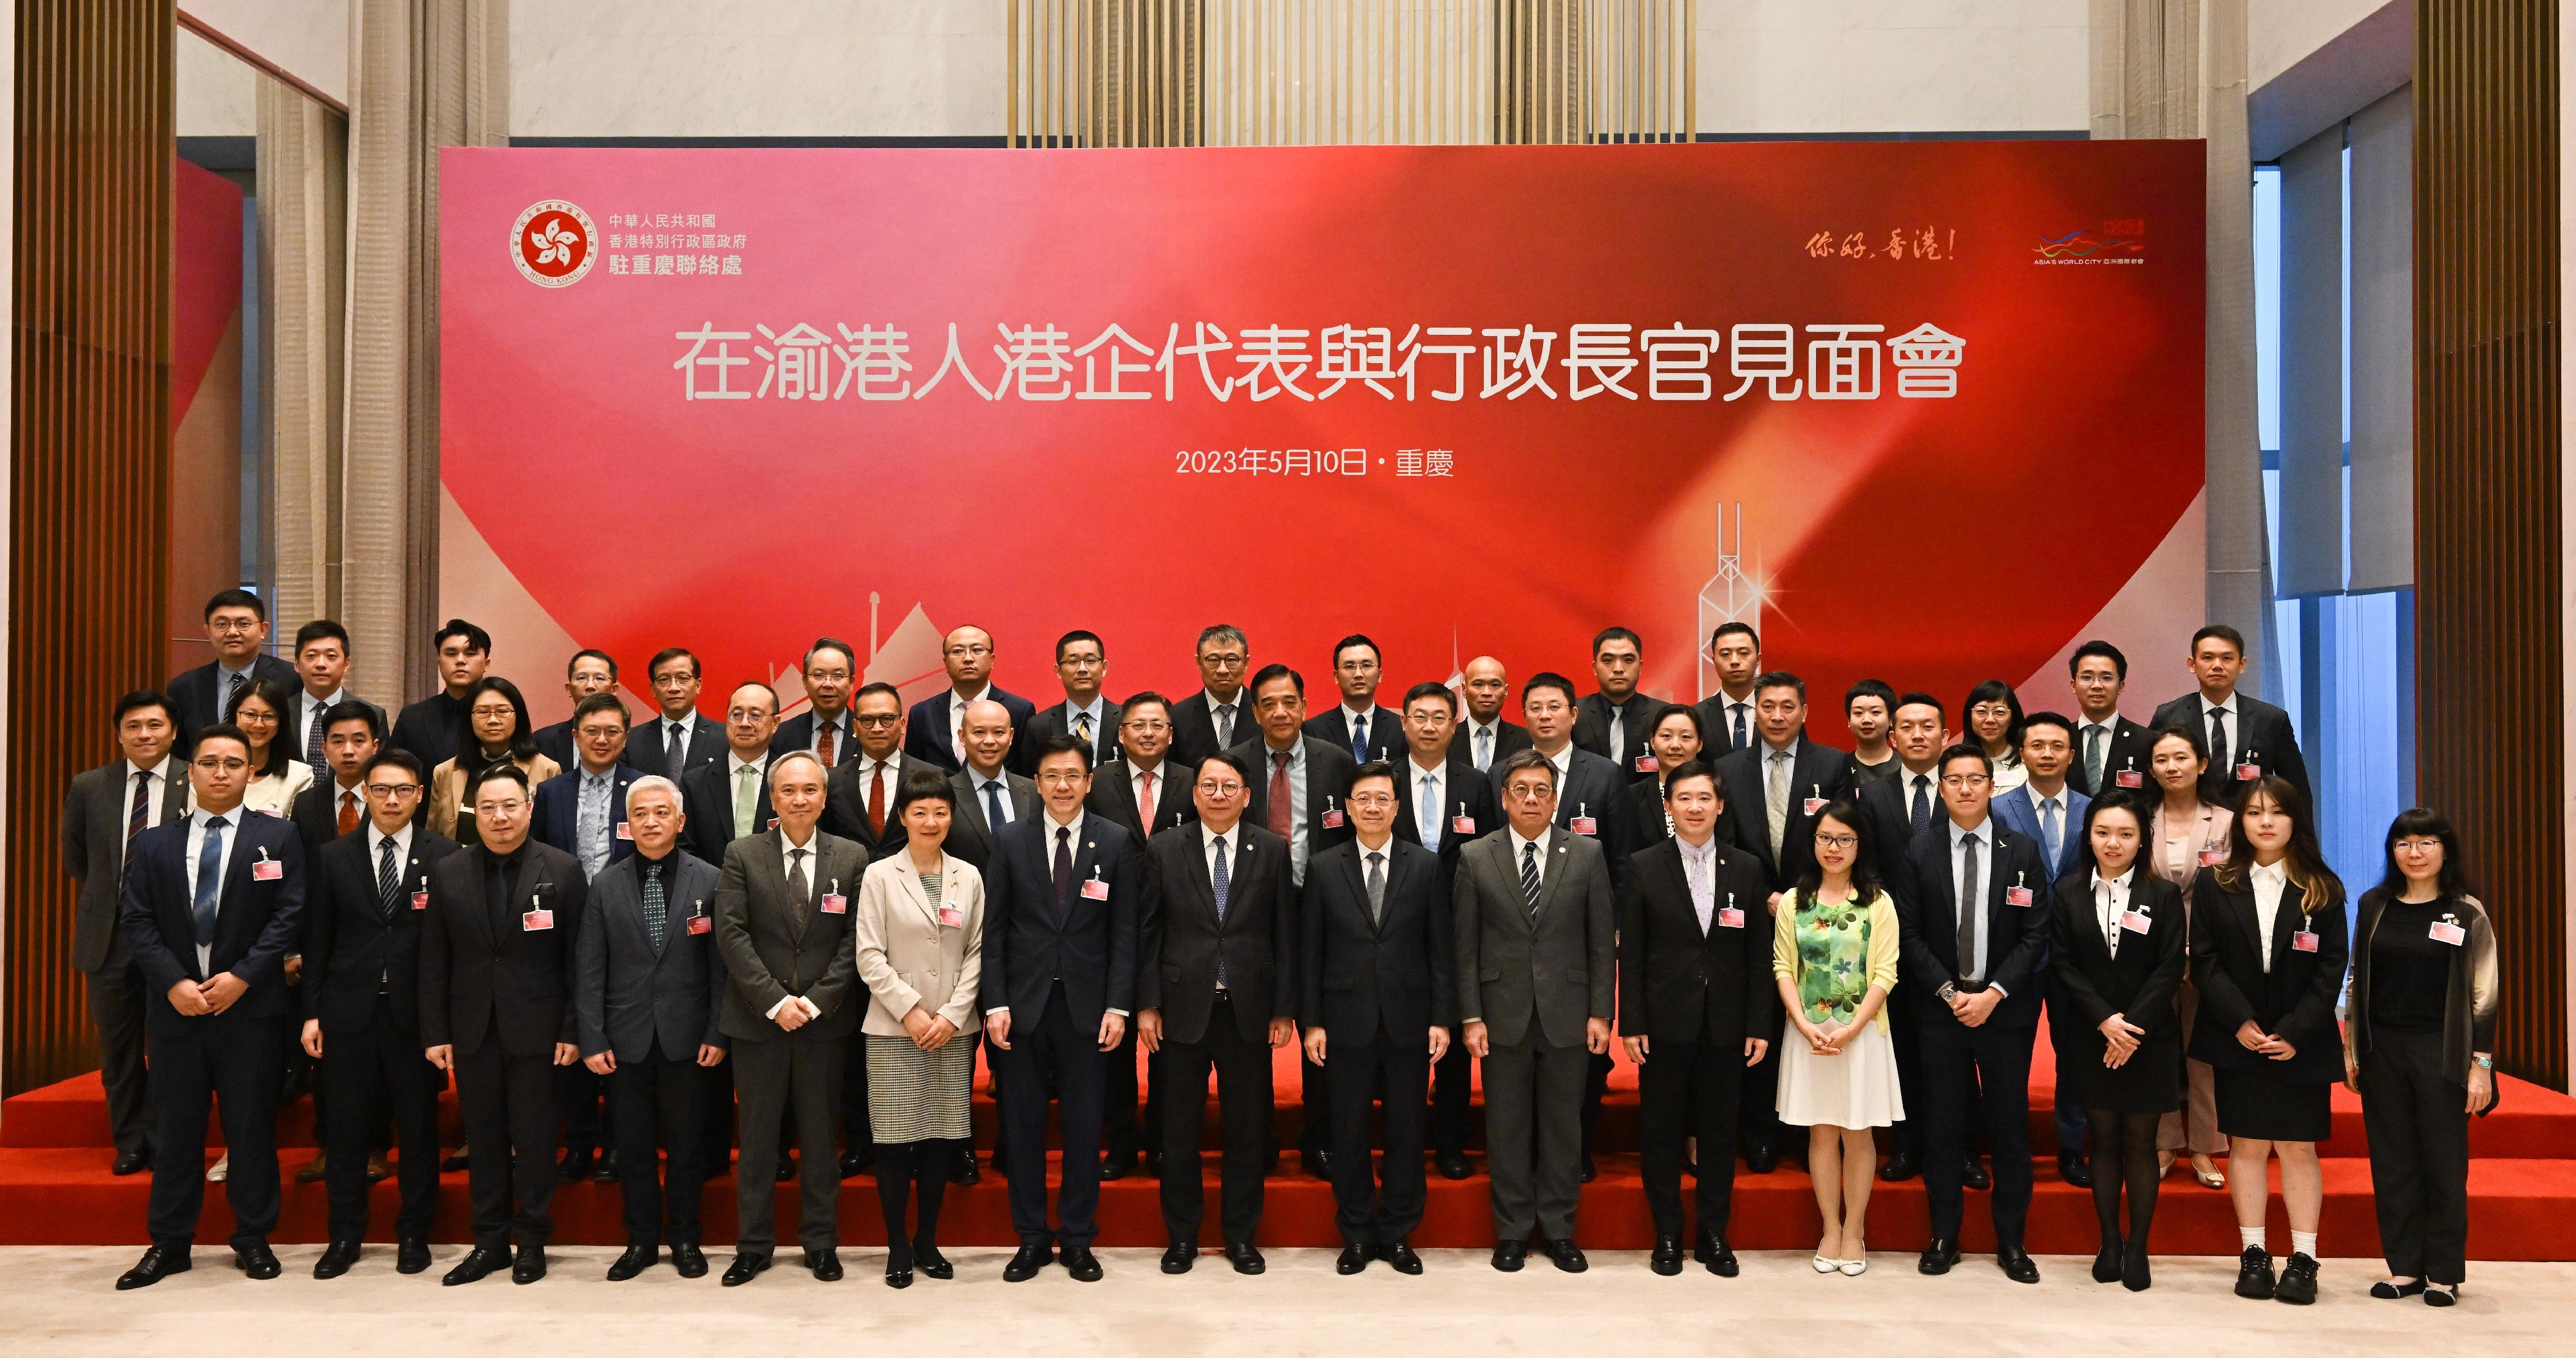 The Chief Executive, Mr John Lee, met and exchanged views with Hong Kong people and representatives of Hong Kong enterprises in Chongqing today (May 10). Photo shows (from first row, seventh left) the Secretary for Innovation, Technology and Industry, Professor Sun Dong; the Chief Secretary for Administration, Mr Chan Kwok-ki; Mr Lee; the Secretary for Commerce and Economic Development, Mr Algernon Yau; and the Under Secretary for Constitutional and Mainland Affairs, Mr Clement Woo, in a group photo with participants before the dinner.